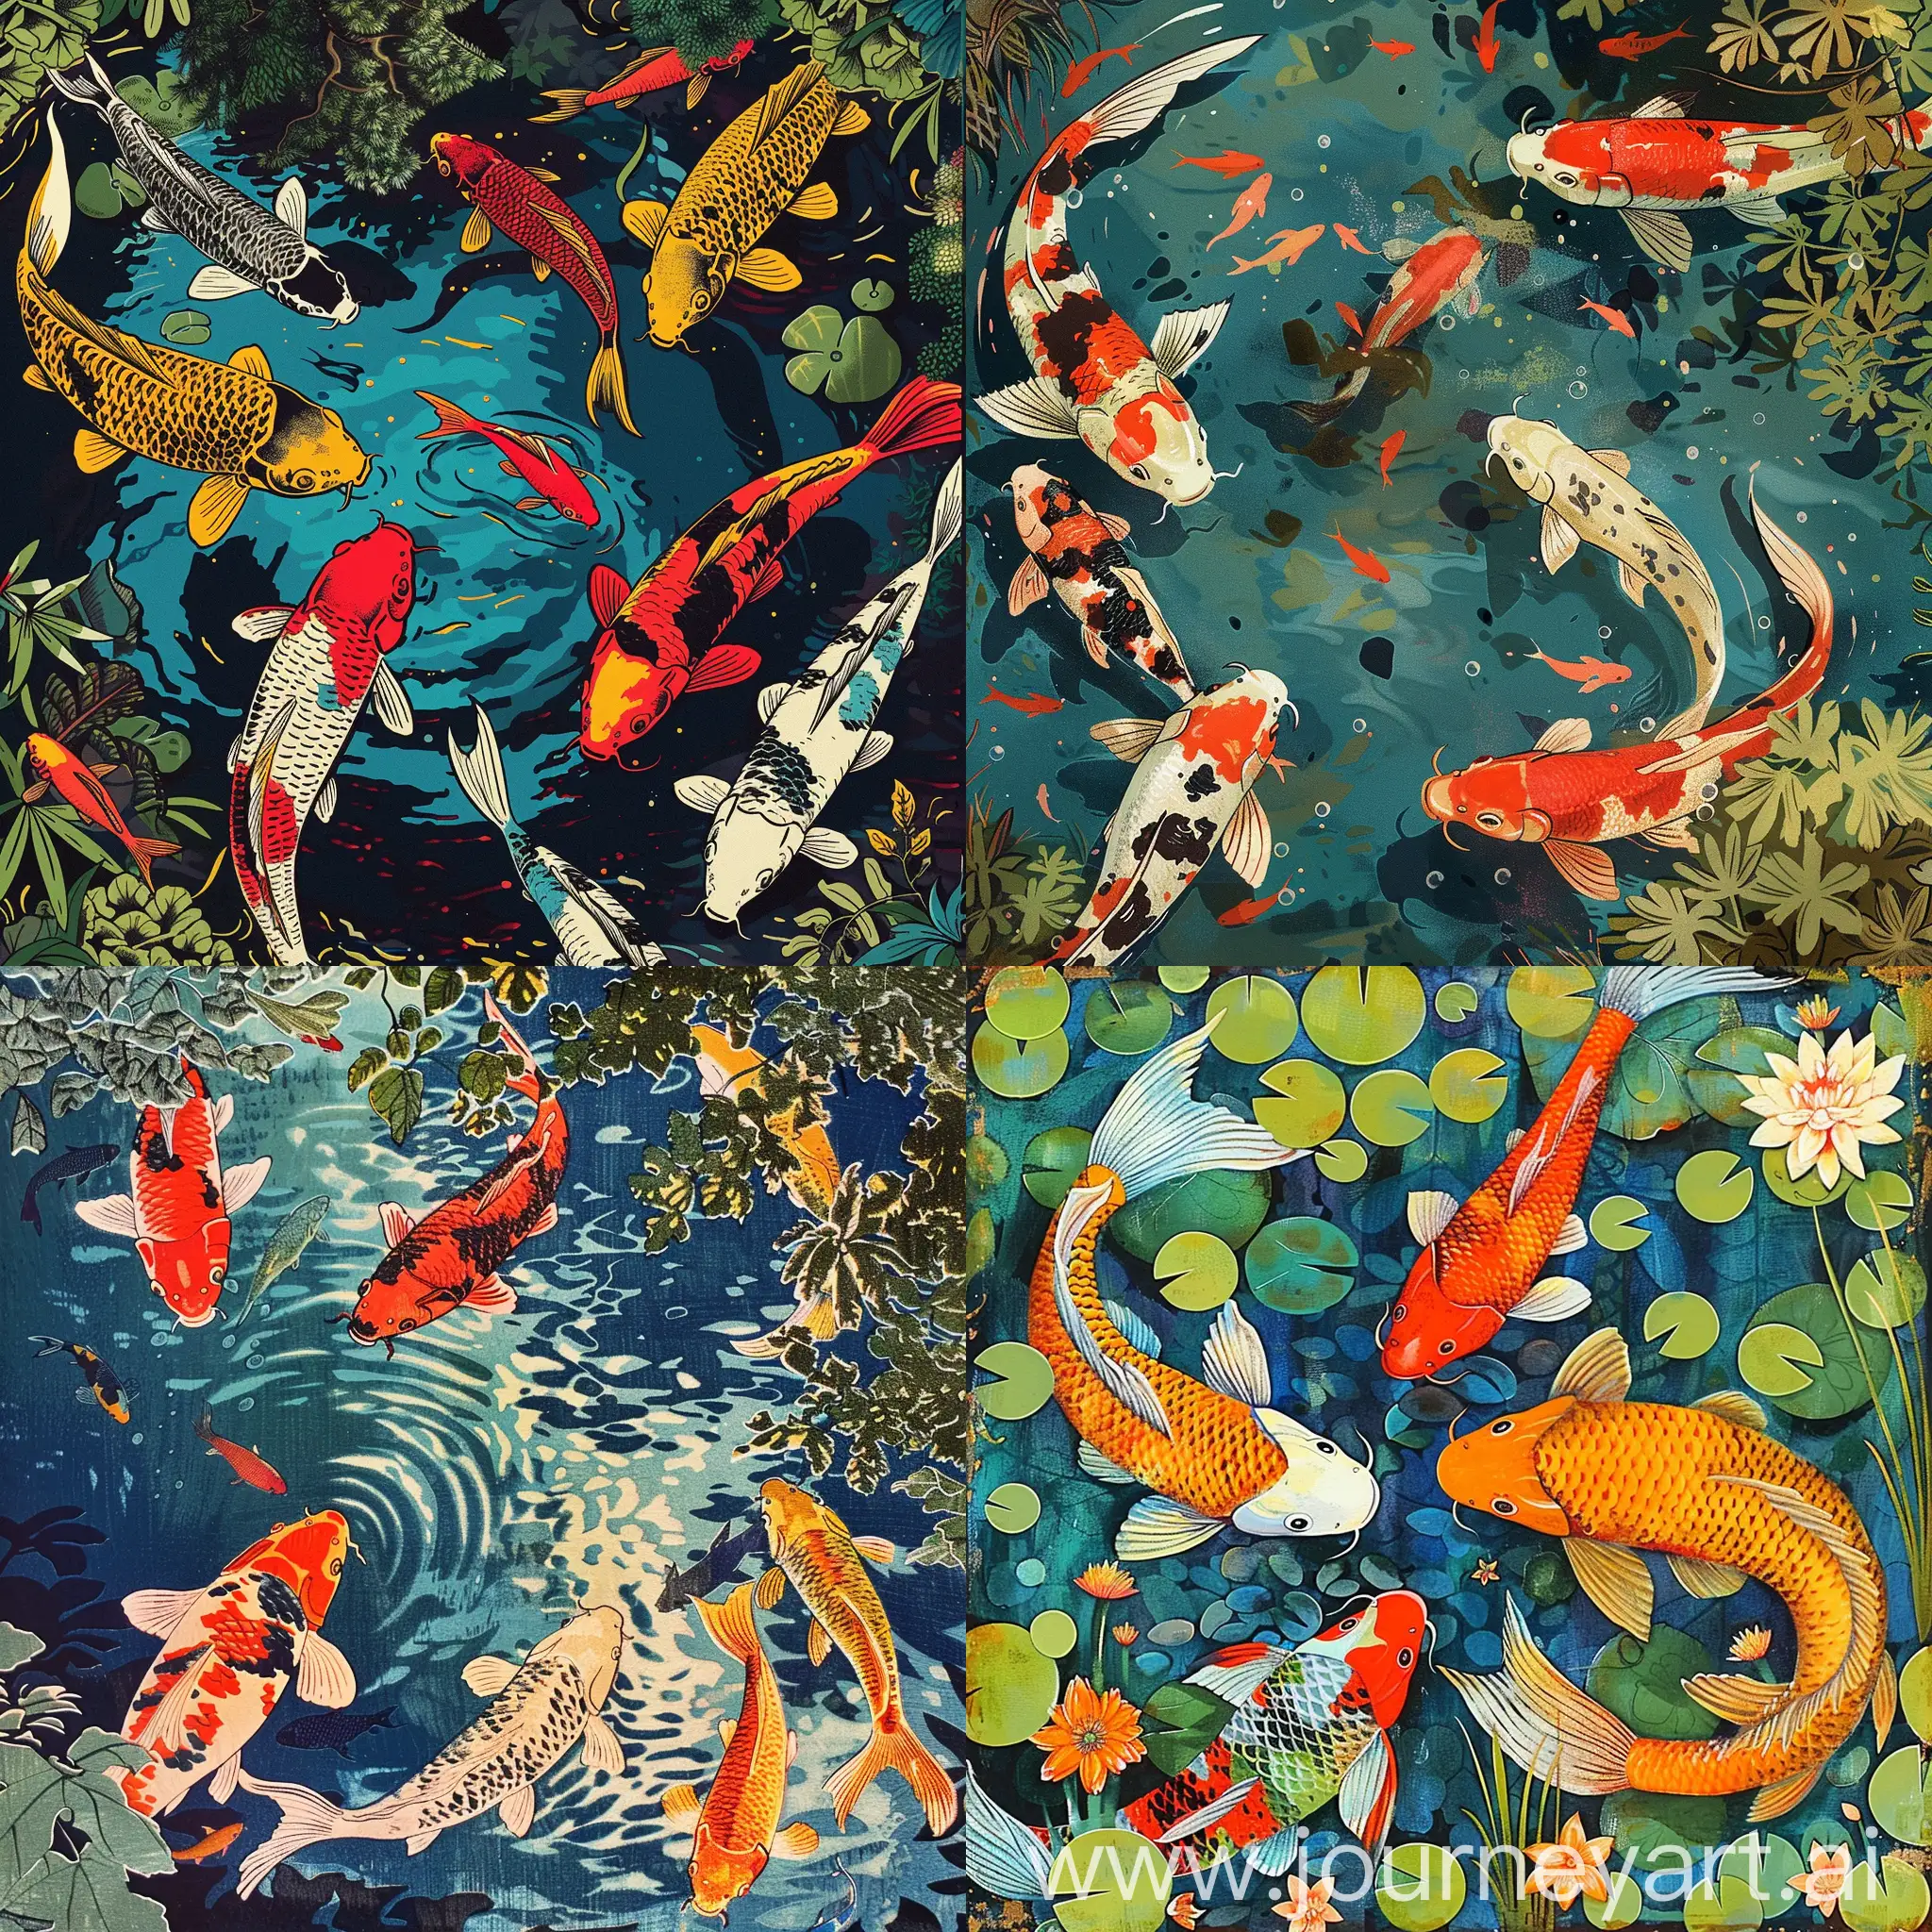 koi fishes in a pond, view from above, Japanese folk art illustration, vibrant colors,